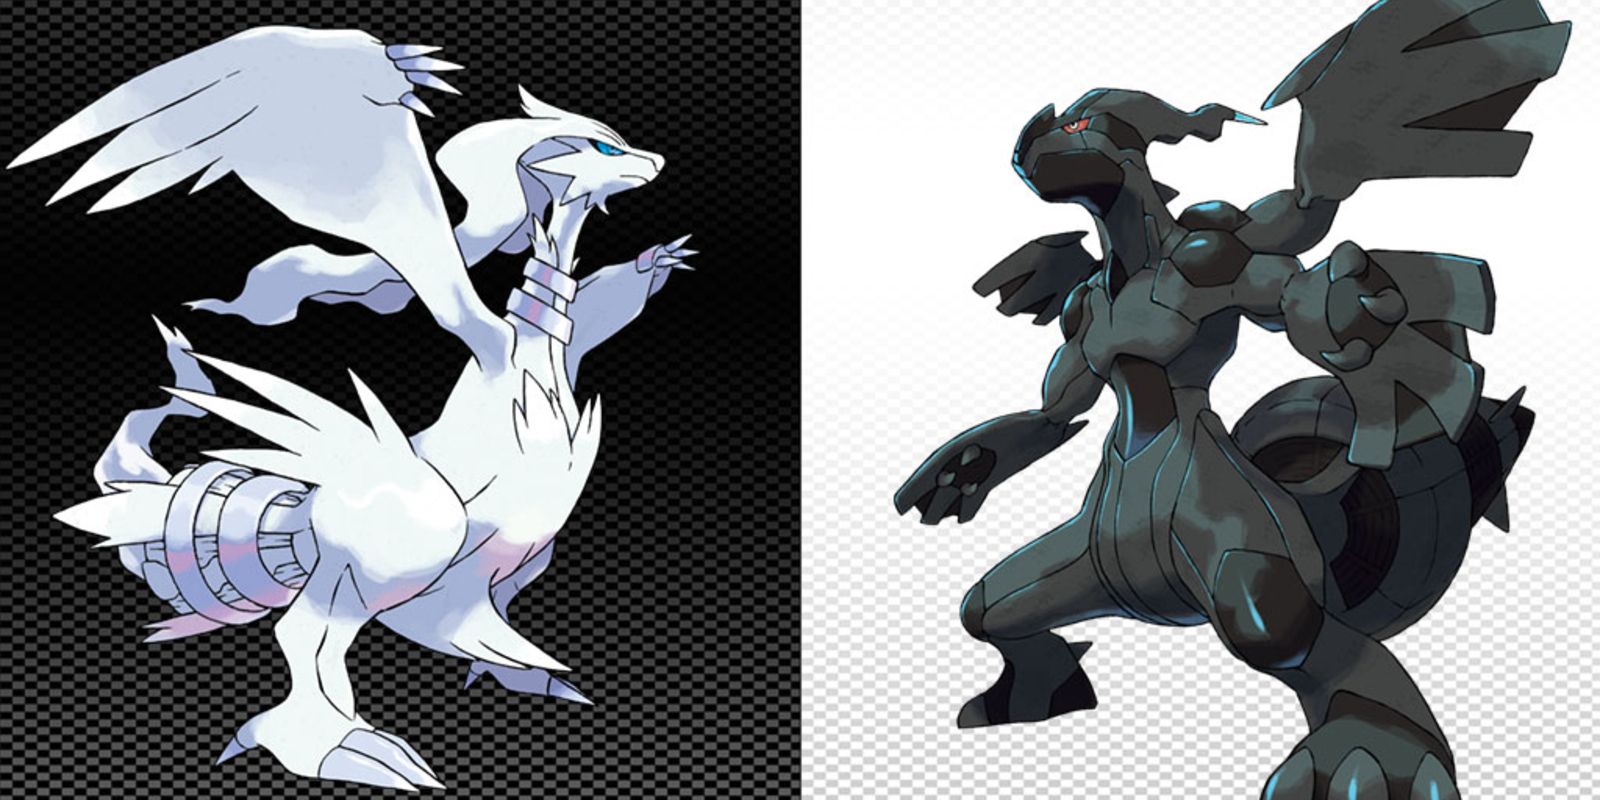 Reshiram and Zekrom glaring at each other in promotional art for Pokemon Black And White